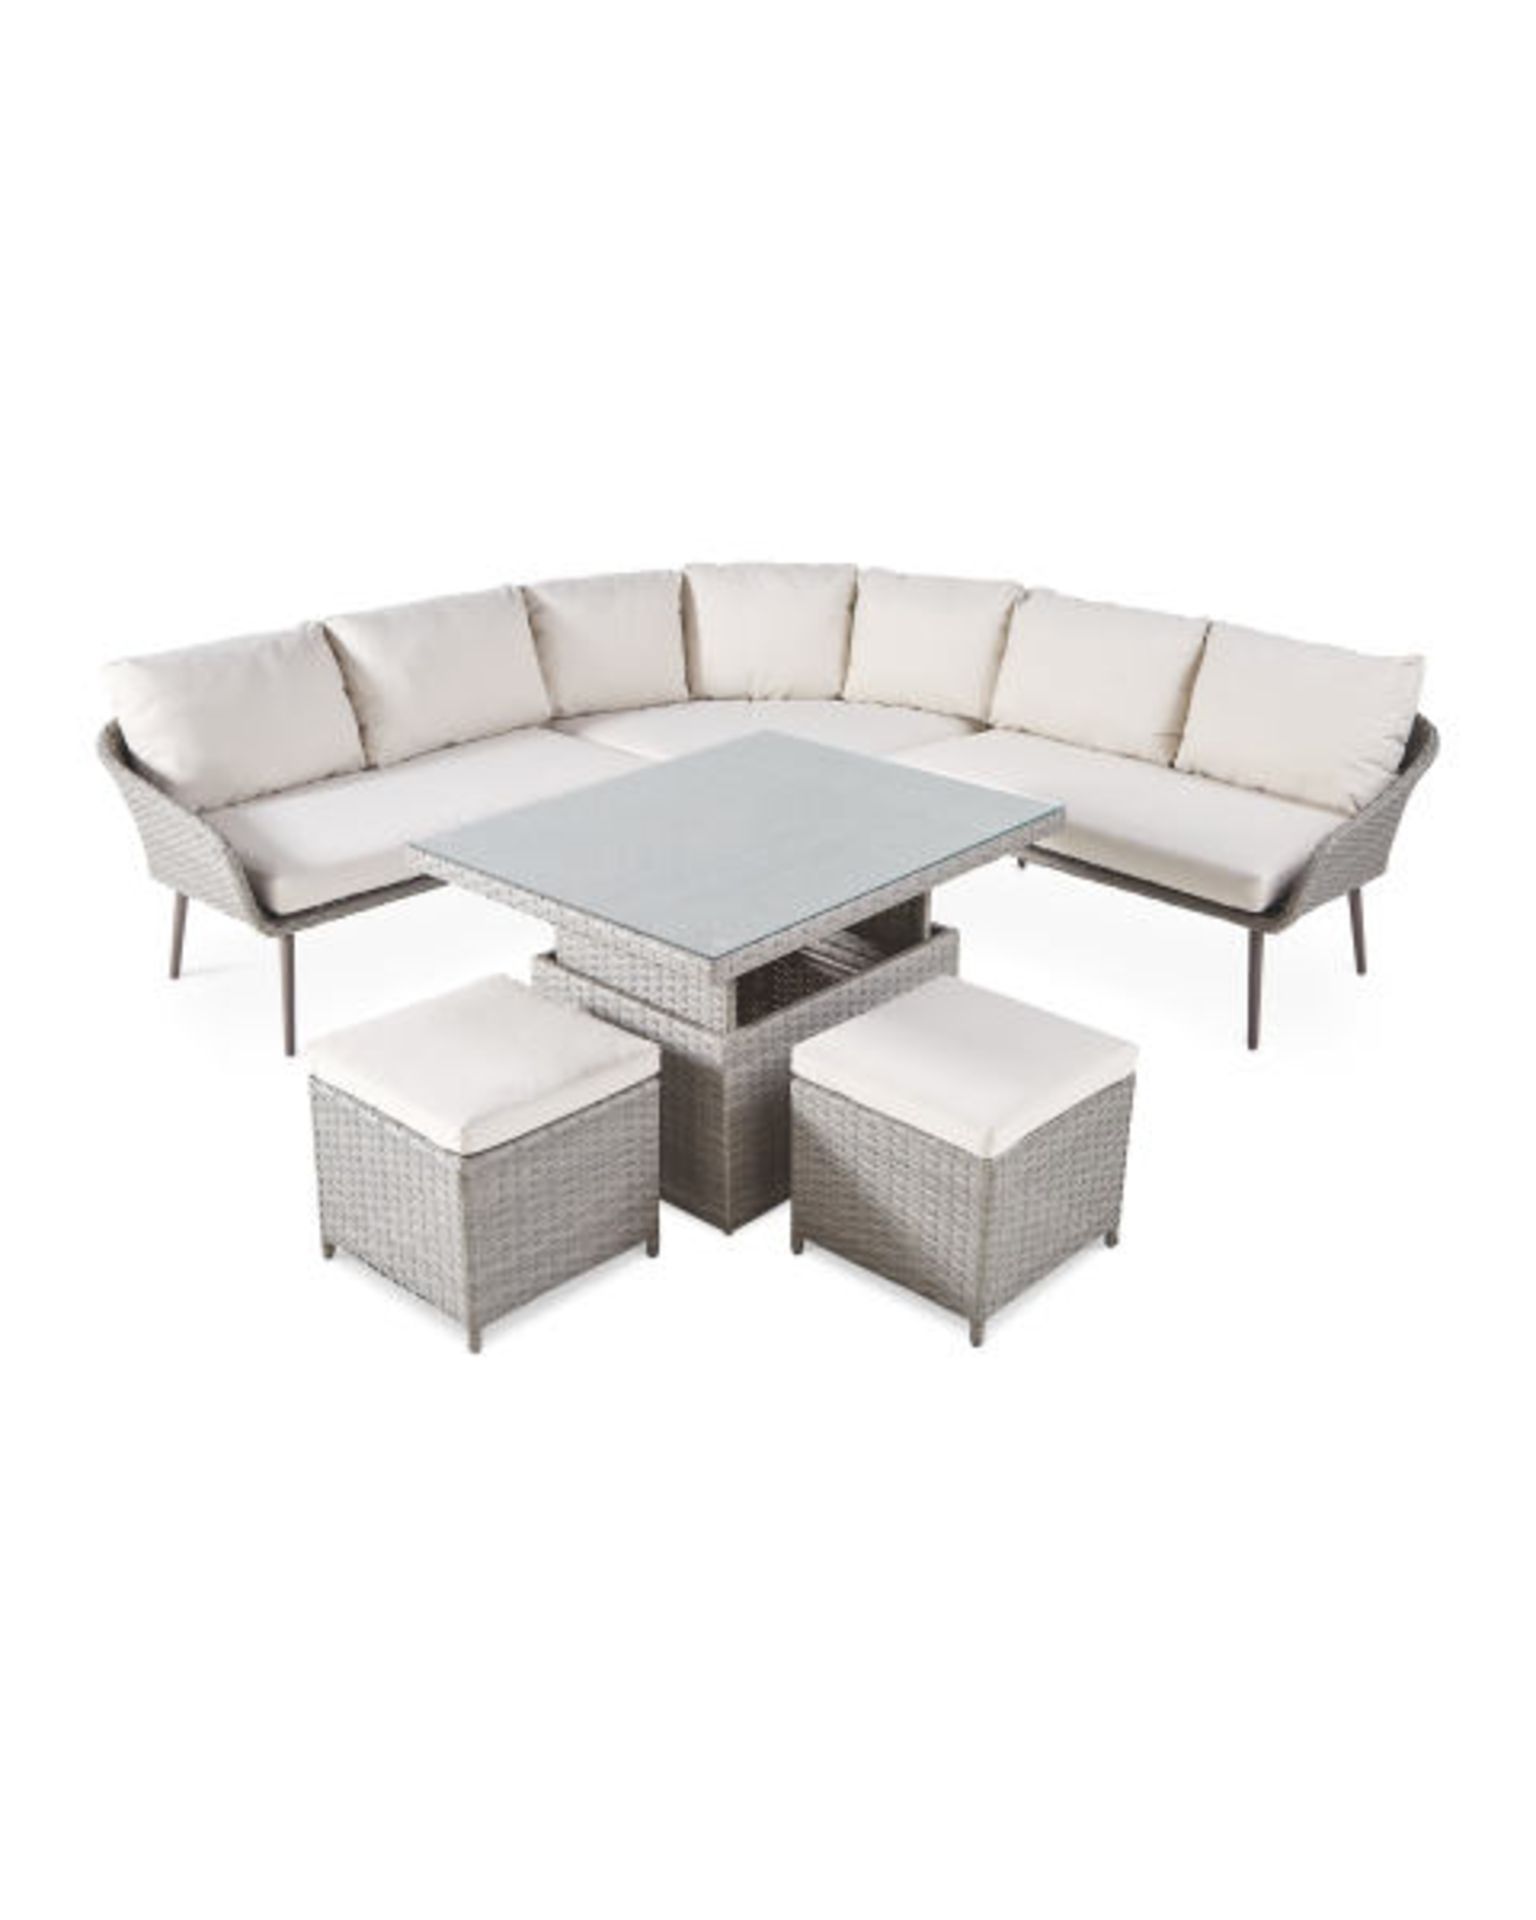 Multifunctional Lounge & Dining Corner Sofa Dining Set. Enjoy the warmer weather with this Luxury - Image 2 of 4